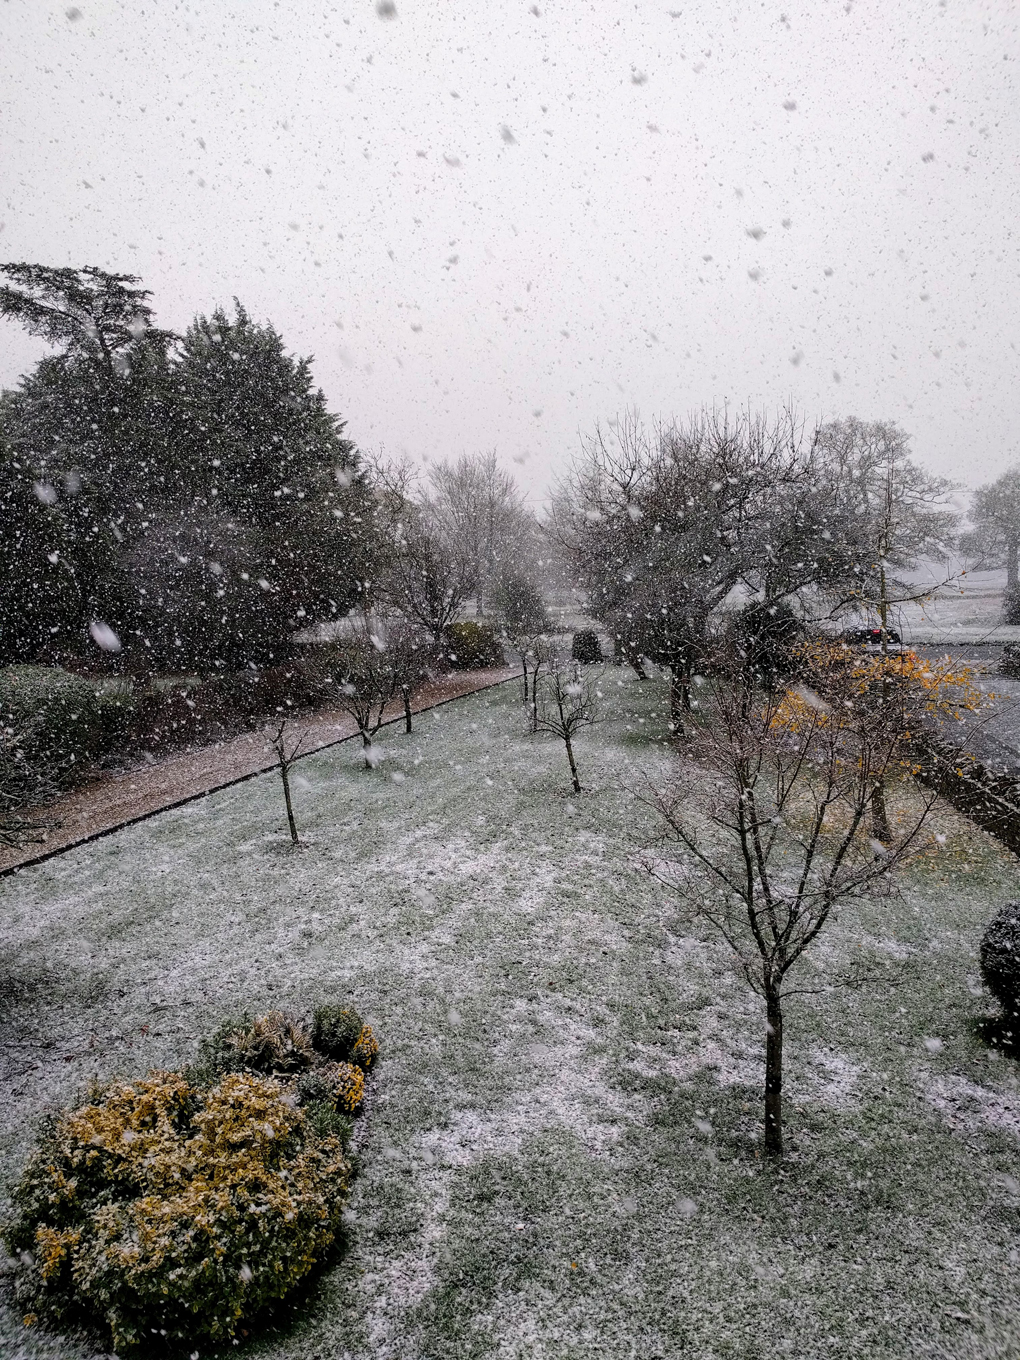 snow falling over a front garden in mid-November.